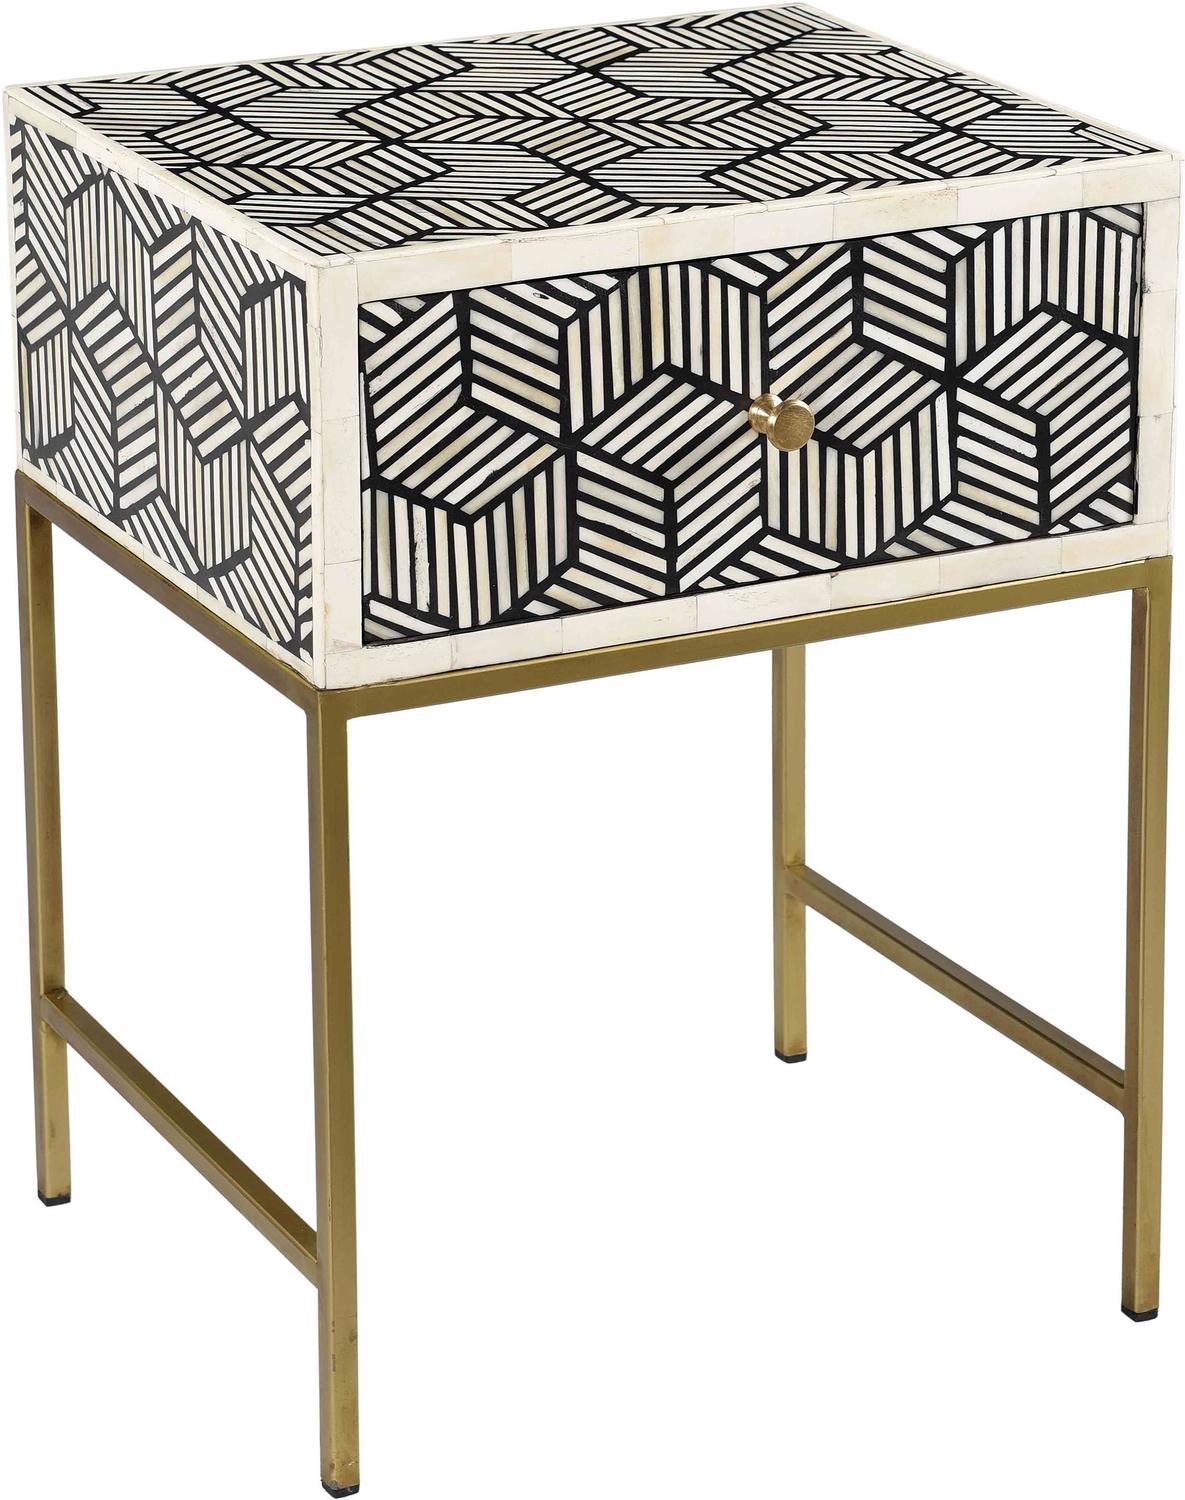  Tov Furniture Nightstands Accent Tables Black and White